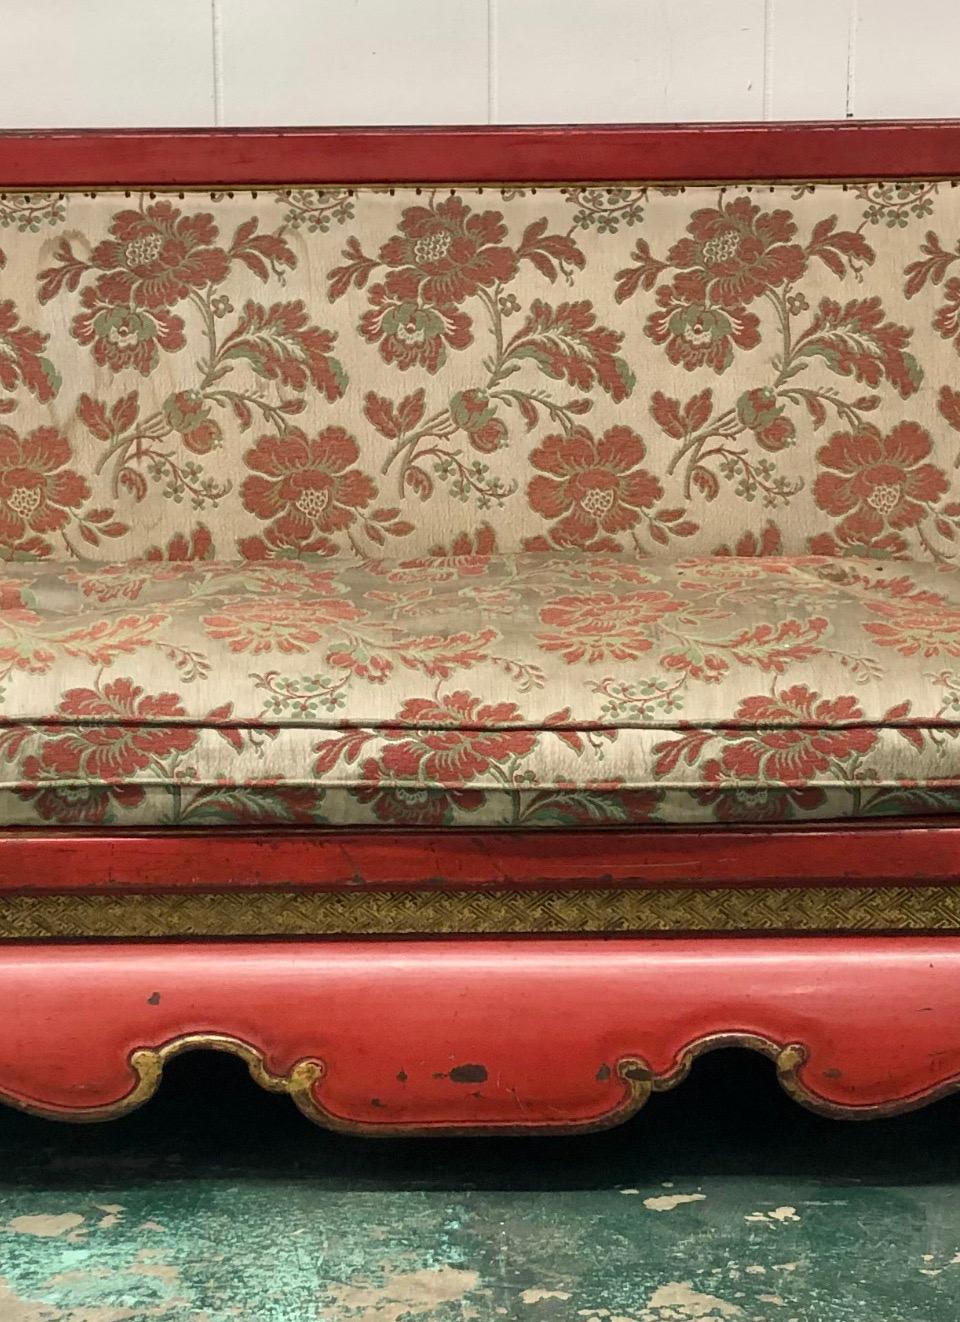 Qing Dynasty Aesthetic Movement Imperial Red Lacquer Sofa / Bench, 19th Century For Sale 3